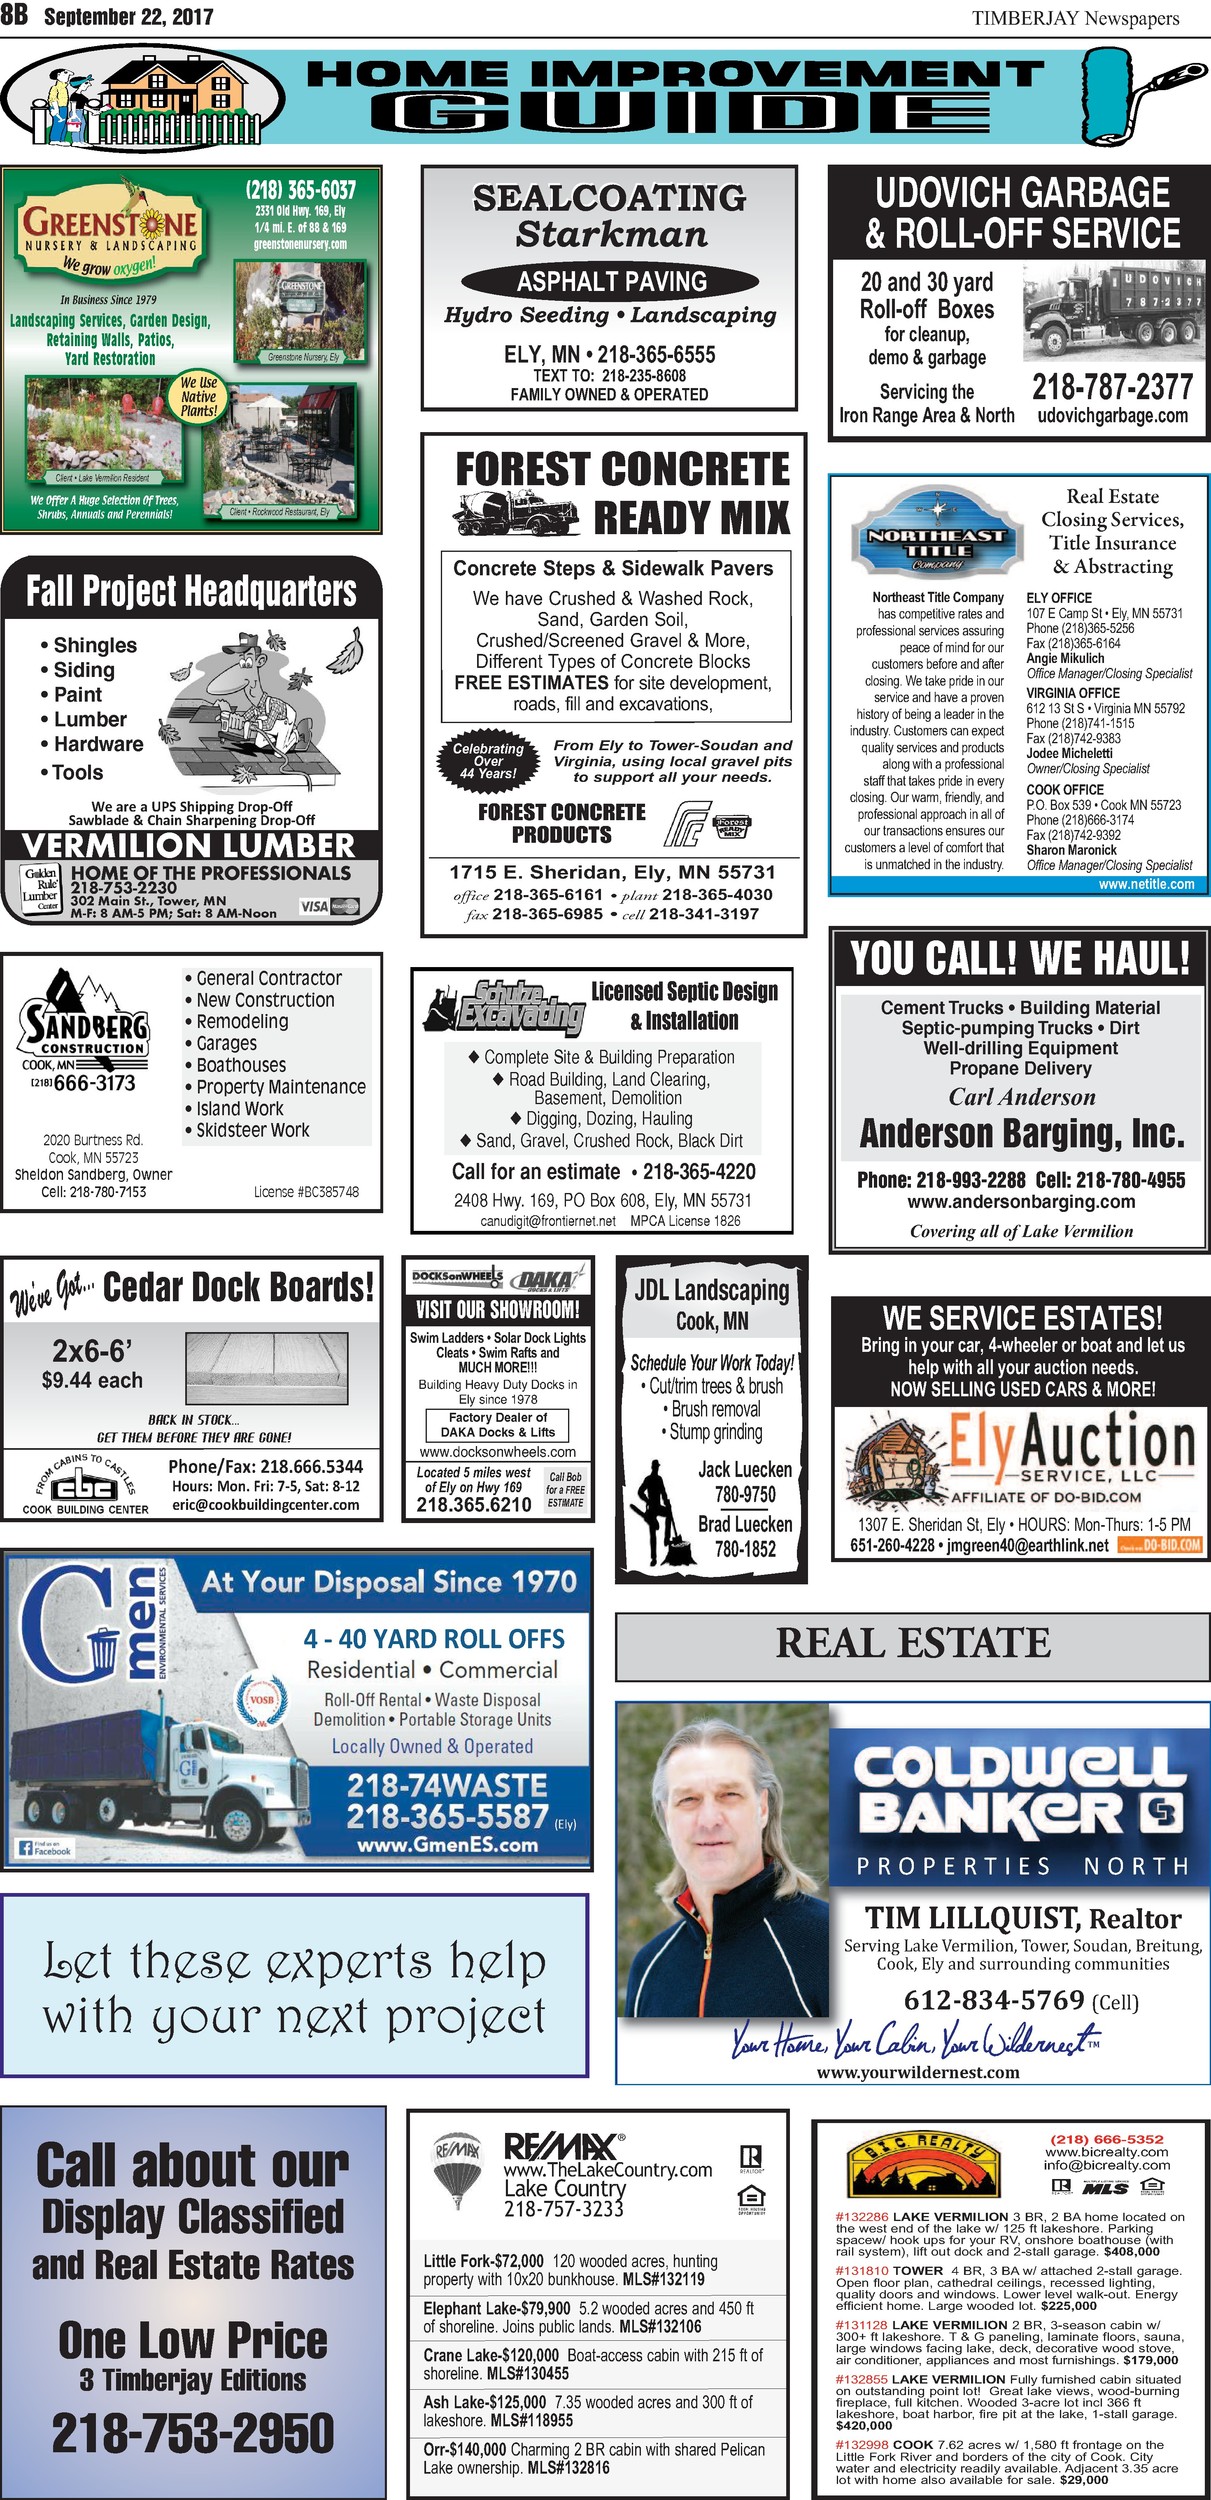 Click here to download the legal notices and classifieds from page 8B